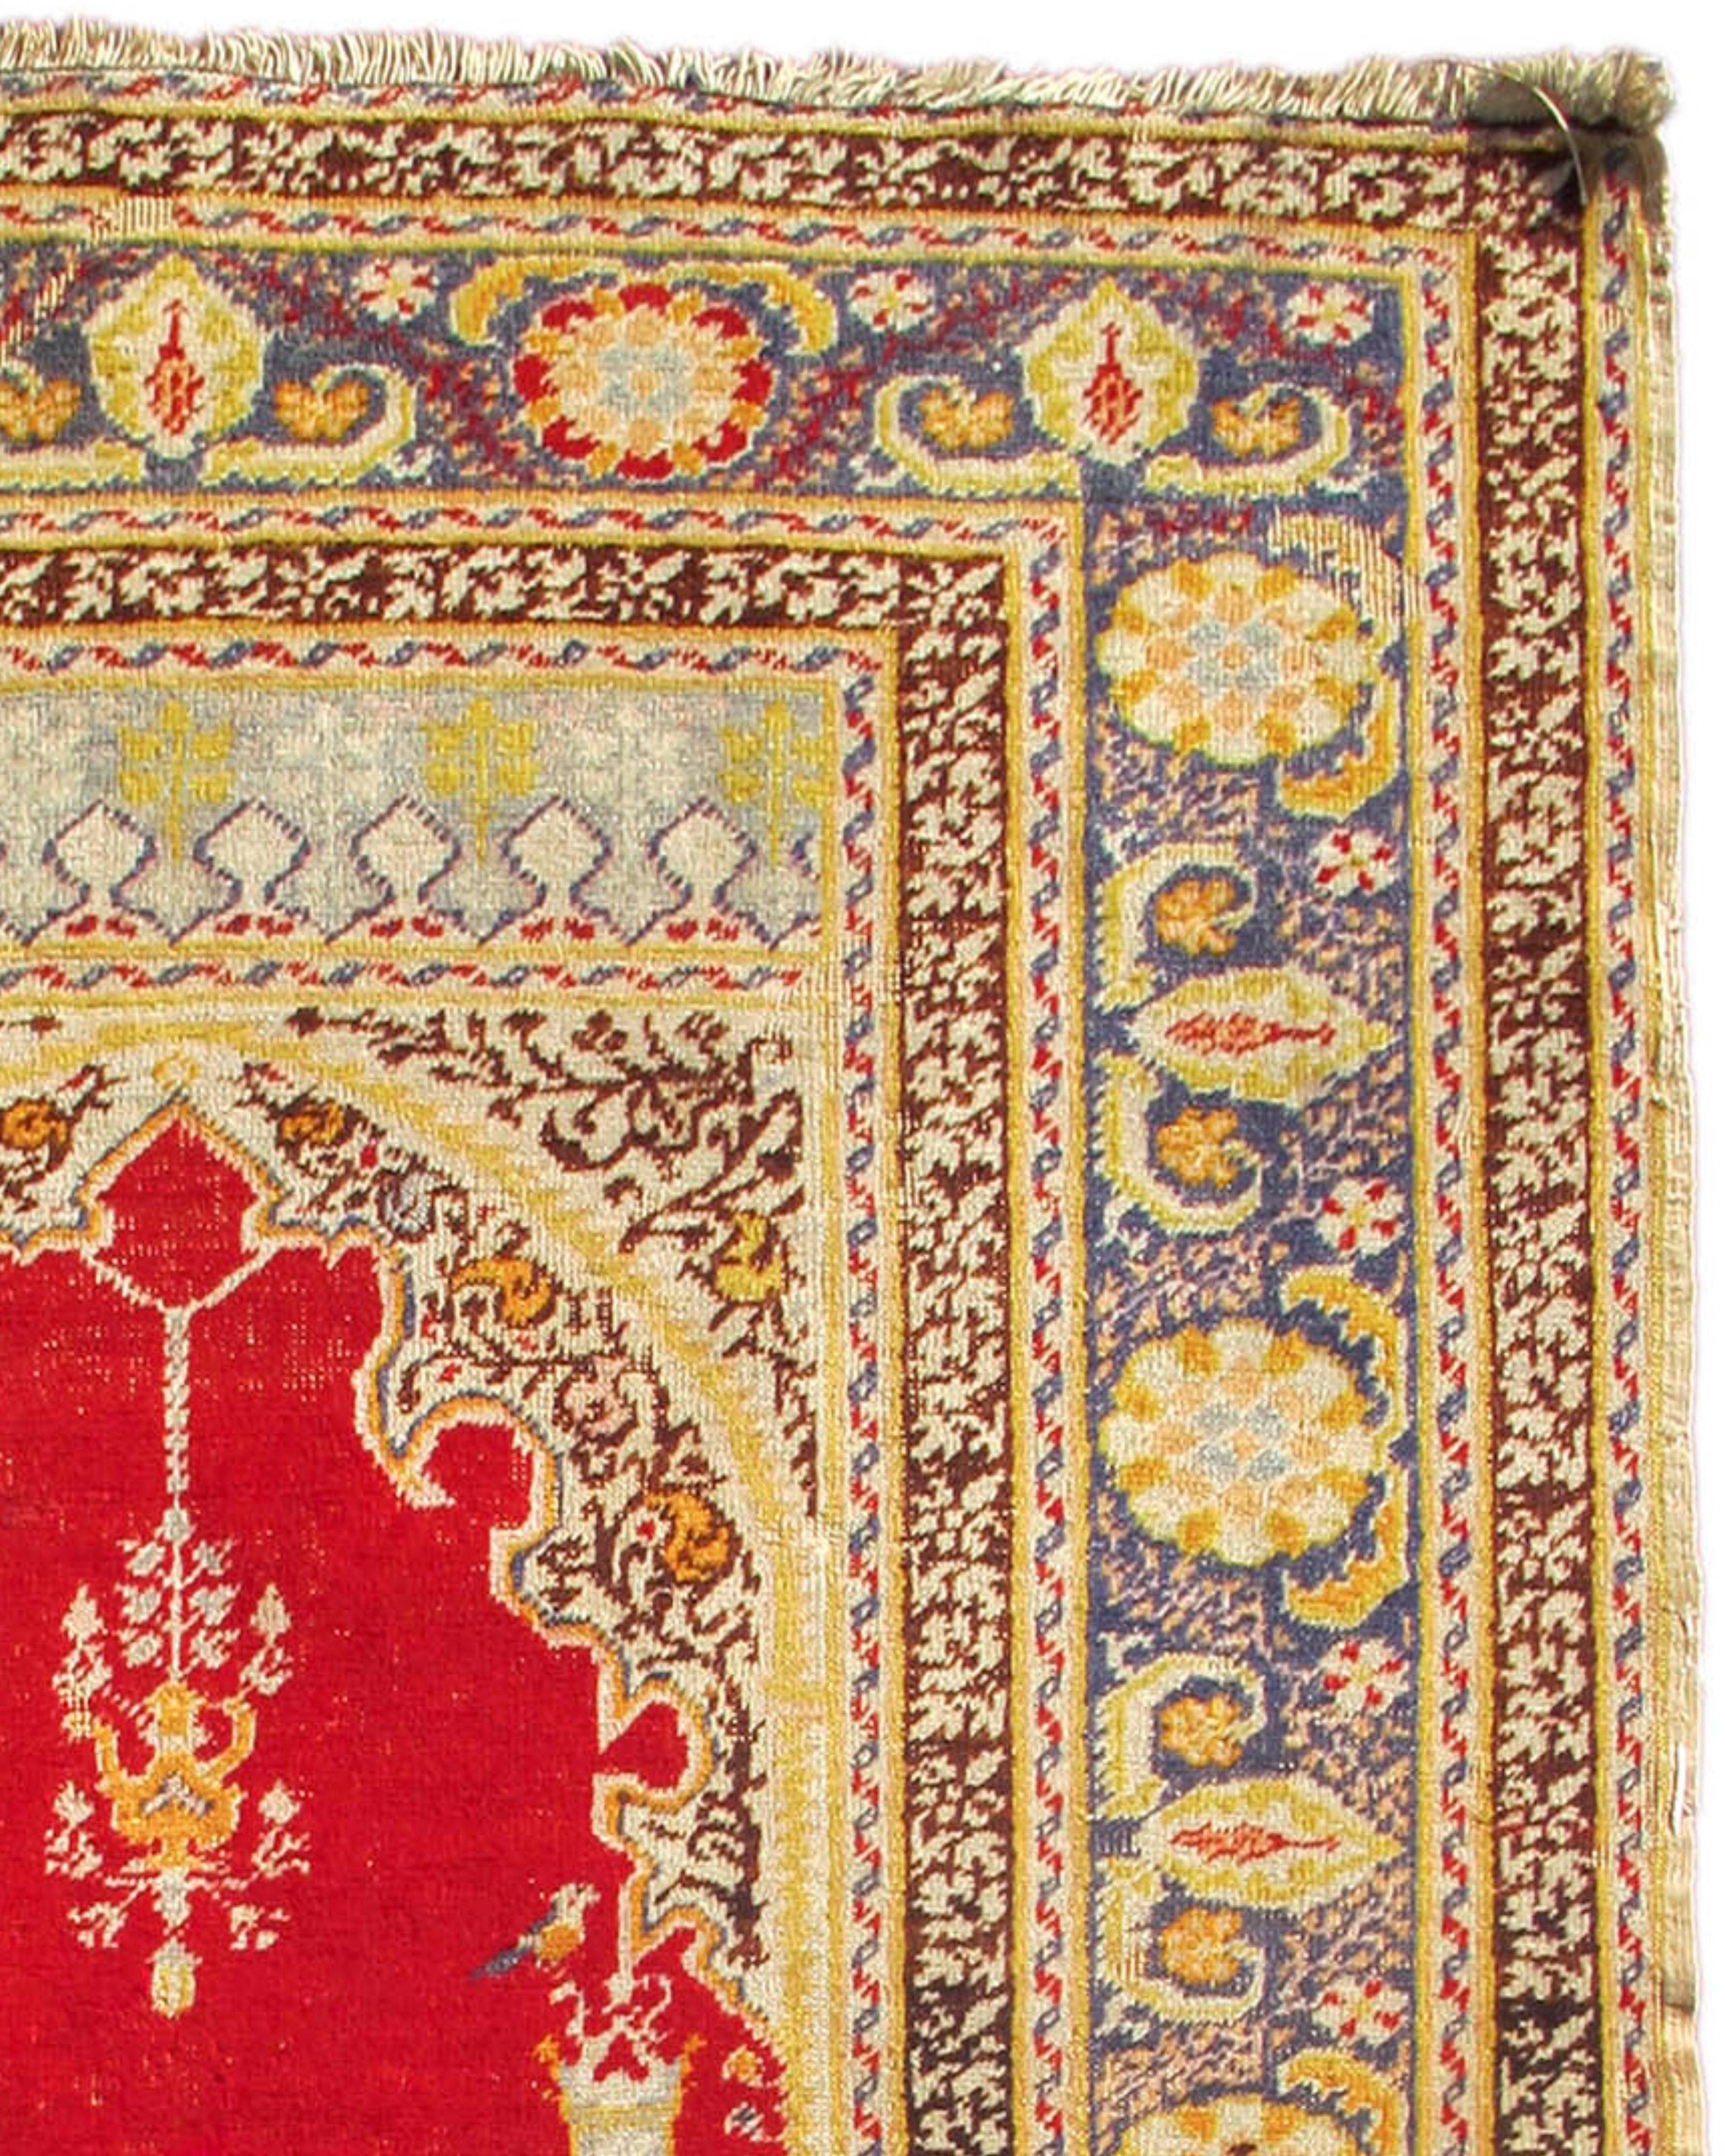 Antique Turkish Ghiordes Prayer Rug, Late 19th Century

Ghiordes prayer rugs are a type of prayer rug that originated in the town of Ghiordes, which is now in Turkey. They are known for their angular prayer niches and are considered to be among the